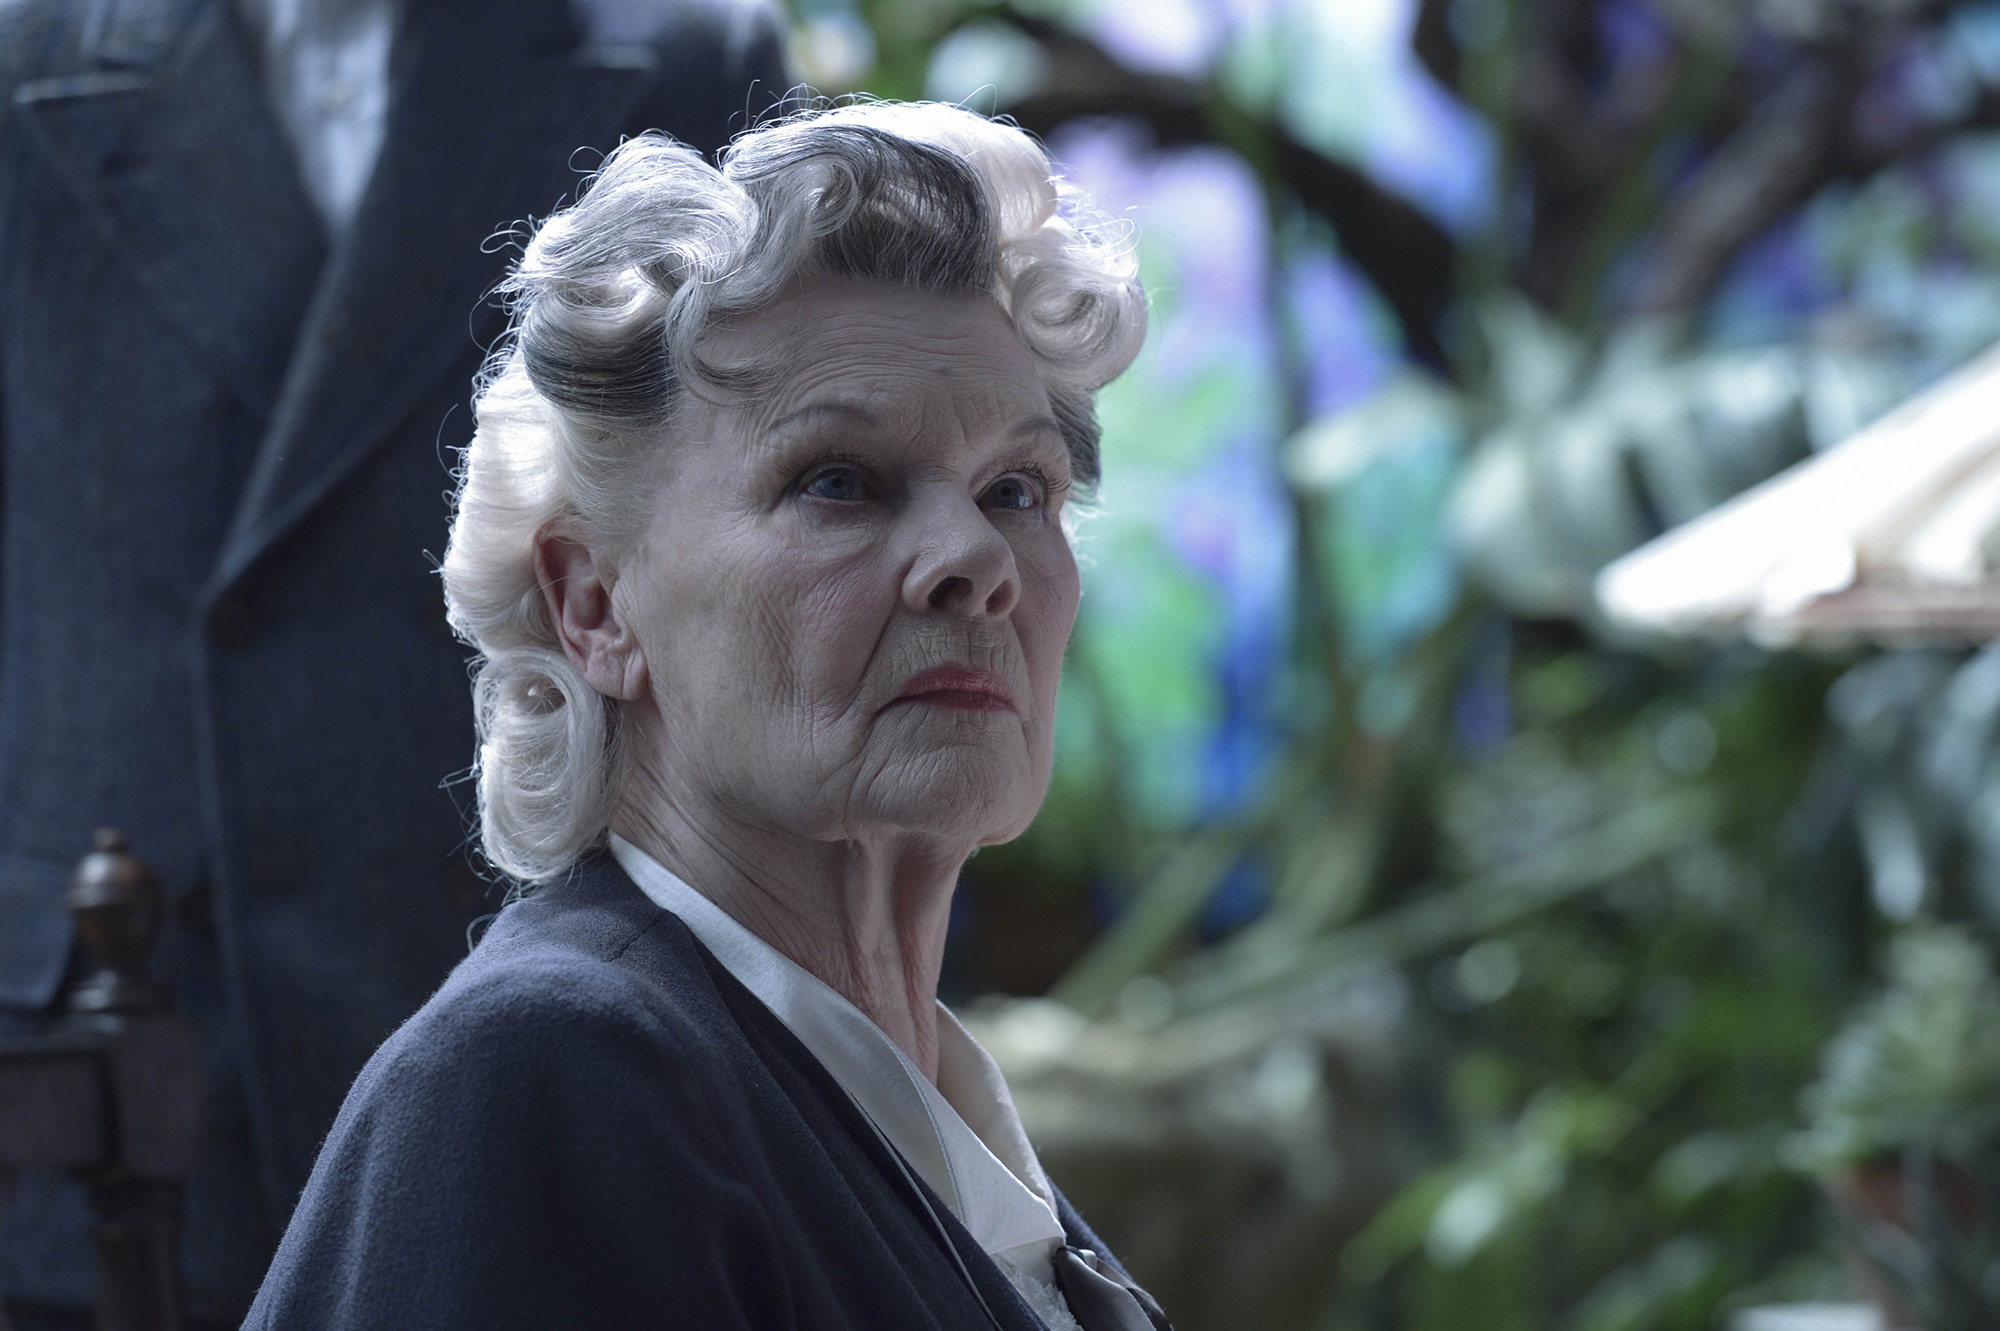 DF-04202 - Judi Dench is Miss Avocet in MISS PEREGRINE’S SCHOOL FOR PECULIAR CHILDREN. Photo Credit: Jay Maidment.